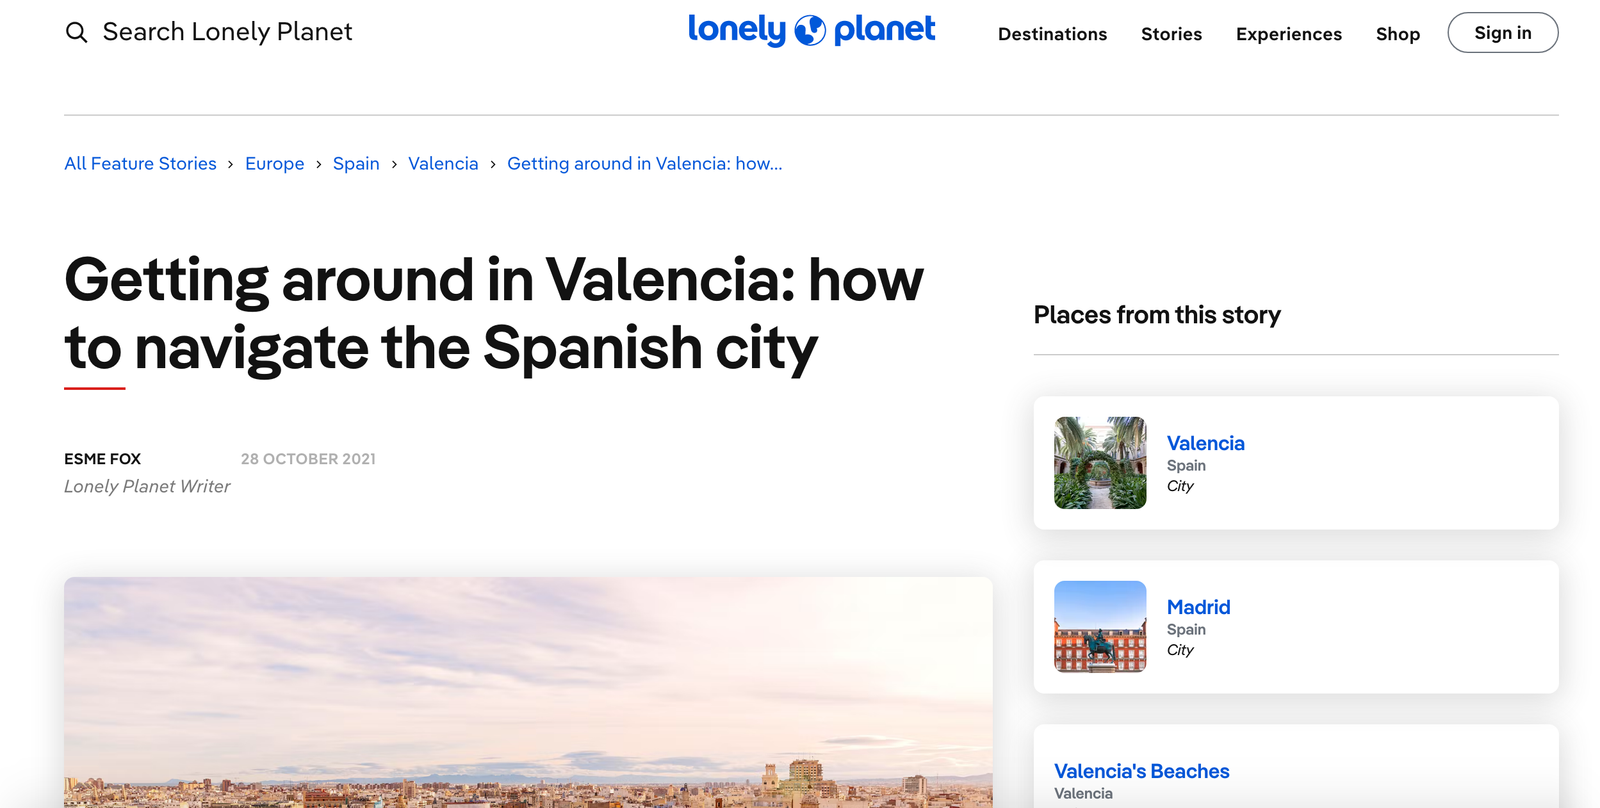 Take a Look Inside: Lonely Planet's Experience – Lonely Planet's